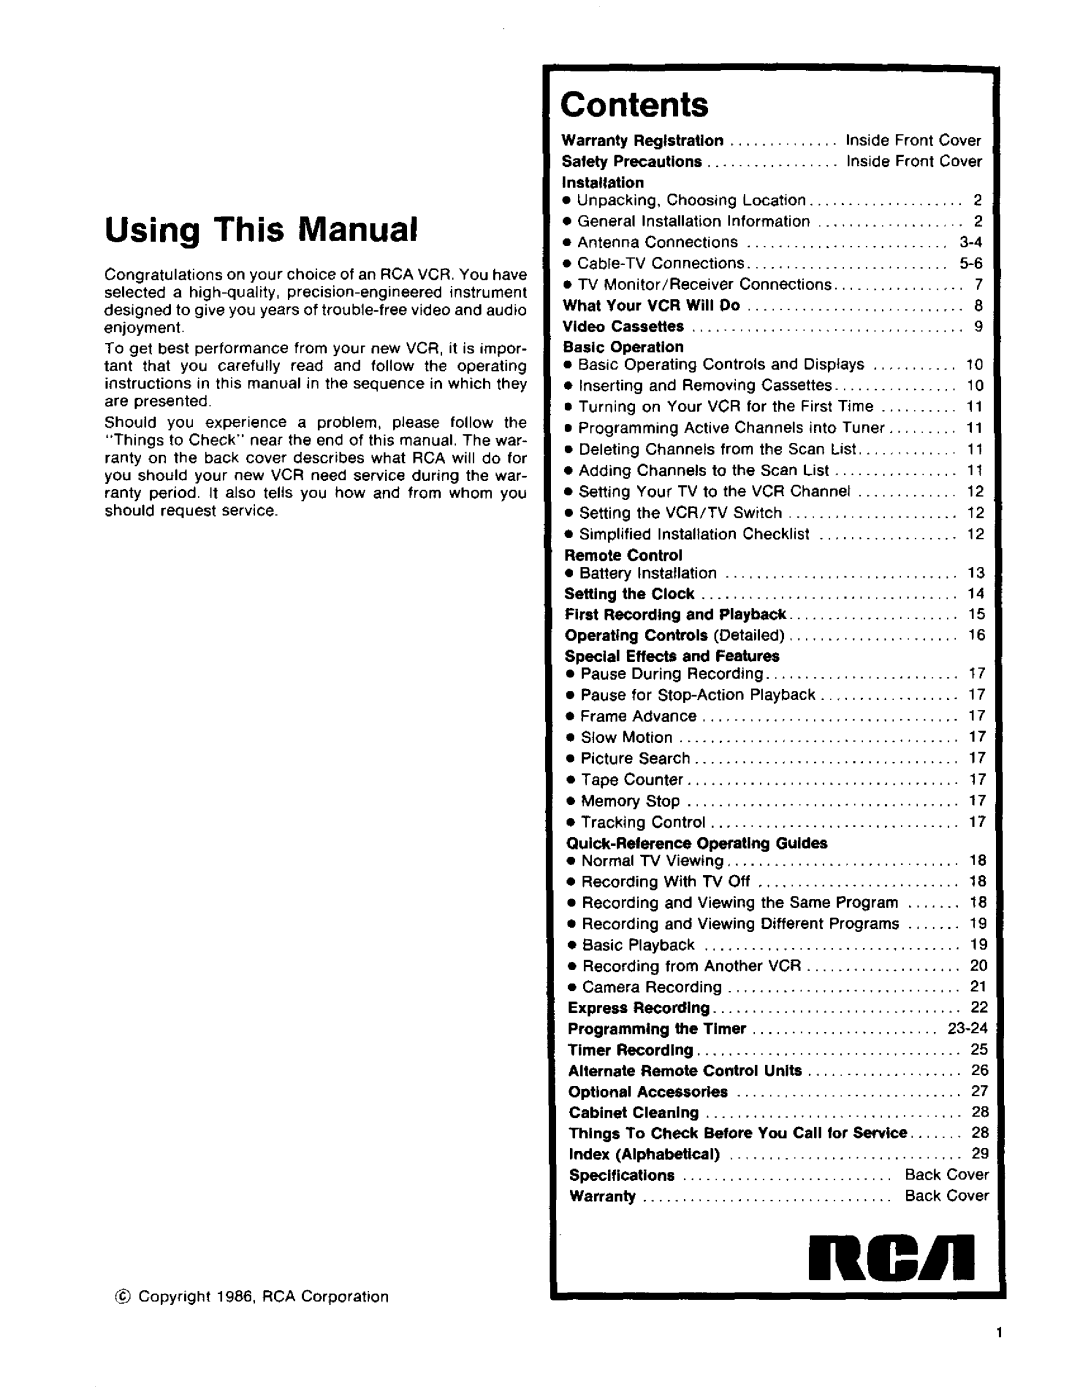 RCA 390 owner manual Using This Manual, Contents, nc411 